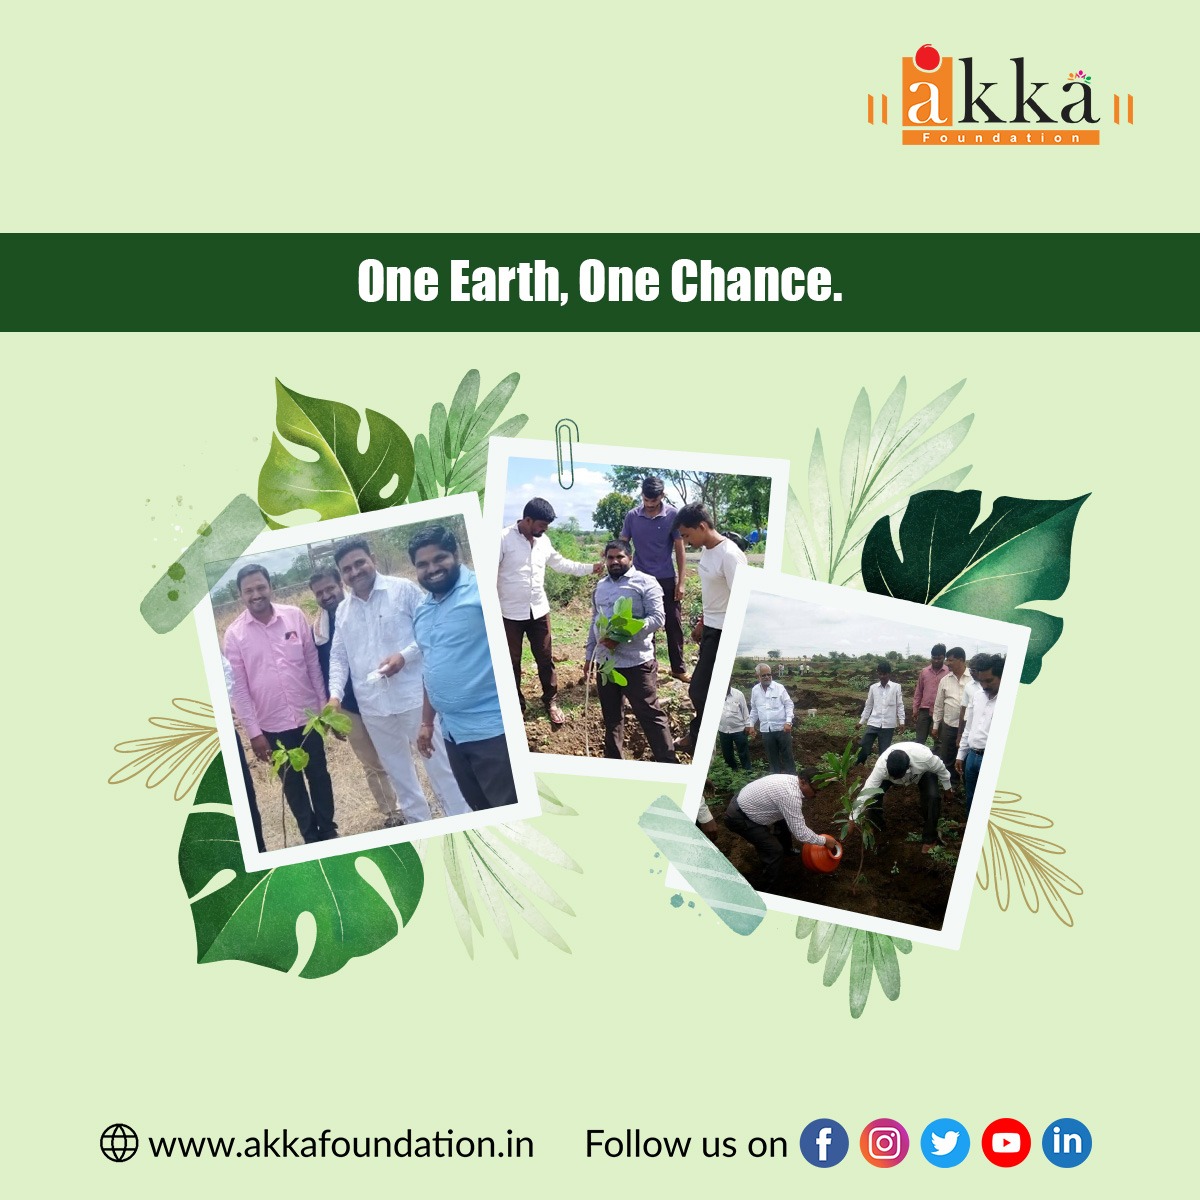 It is our responsibility to hand over Earth in a healthier form to our coming generation. Let us work together to make it a better place. 

#जागतिकवसुंधरादिन #जागतिकवसुंधरादिन🌱 #जागतिकवसुंधरादिन🌏 #Drushti_Abhiyan #Latur #NGO #ProjectAnandi #AkkaFoundation #Anandi